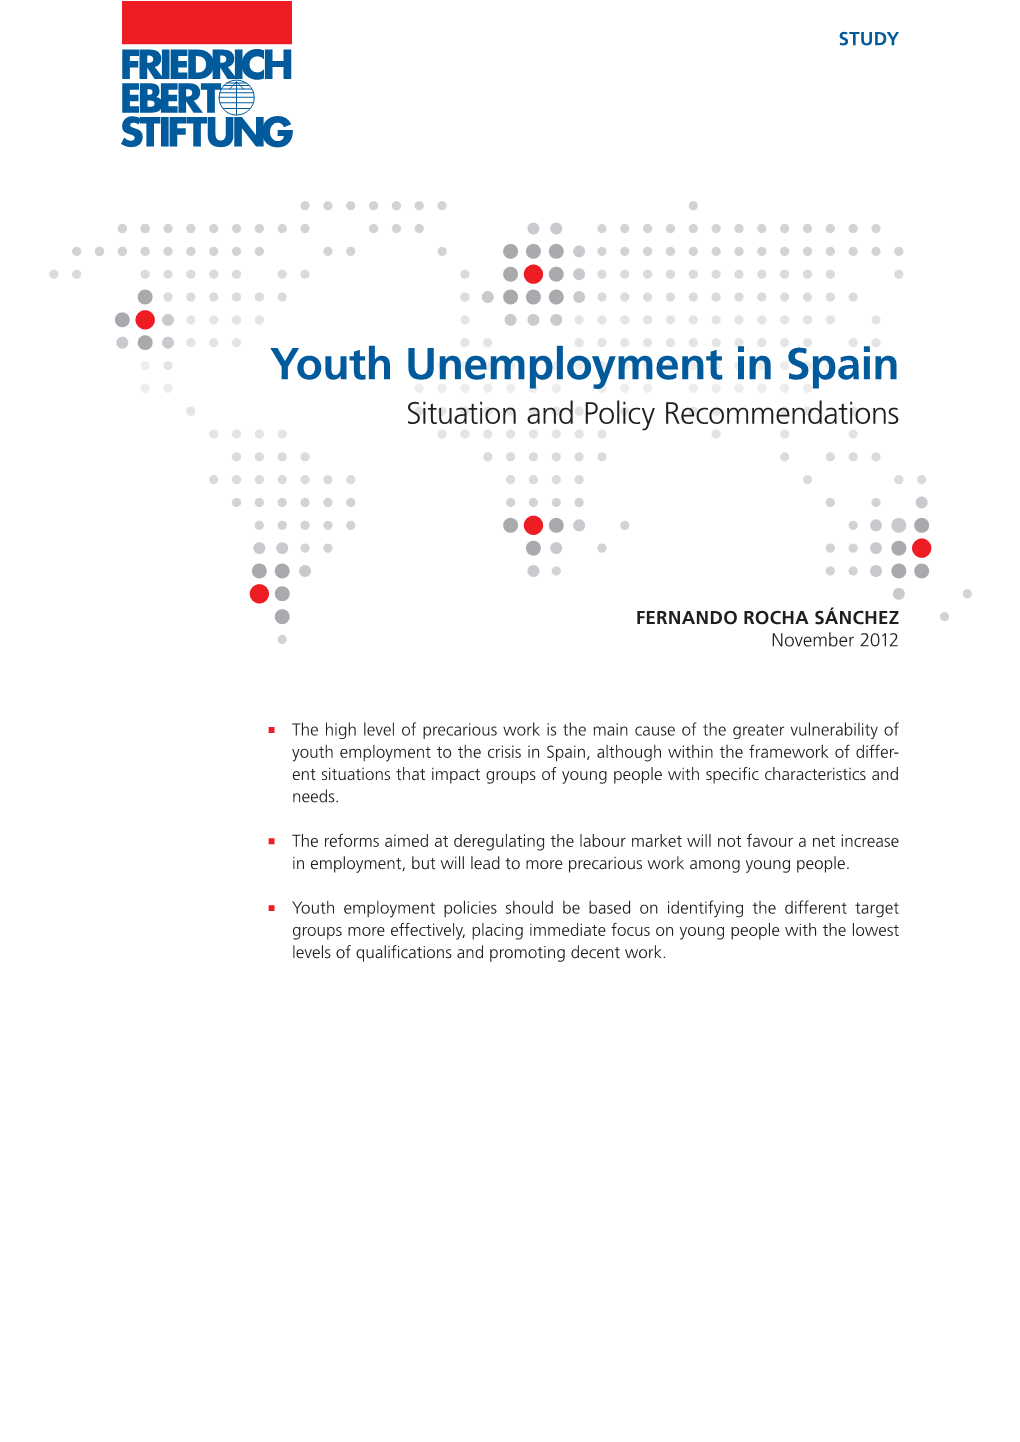 Youth Unemployment in Spain Situation and Policy Recommendations